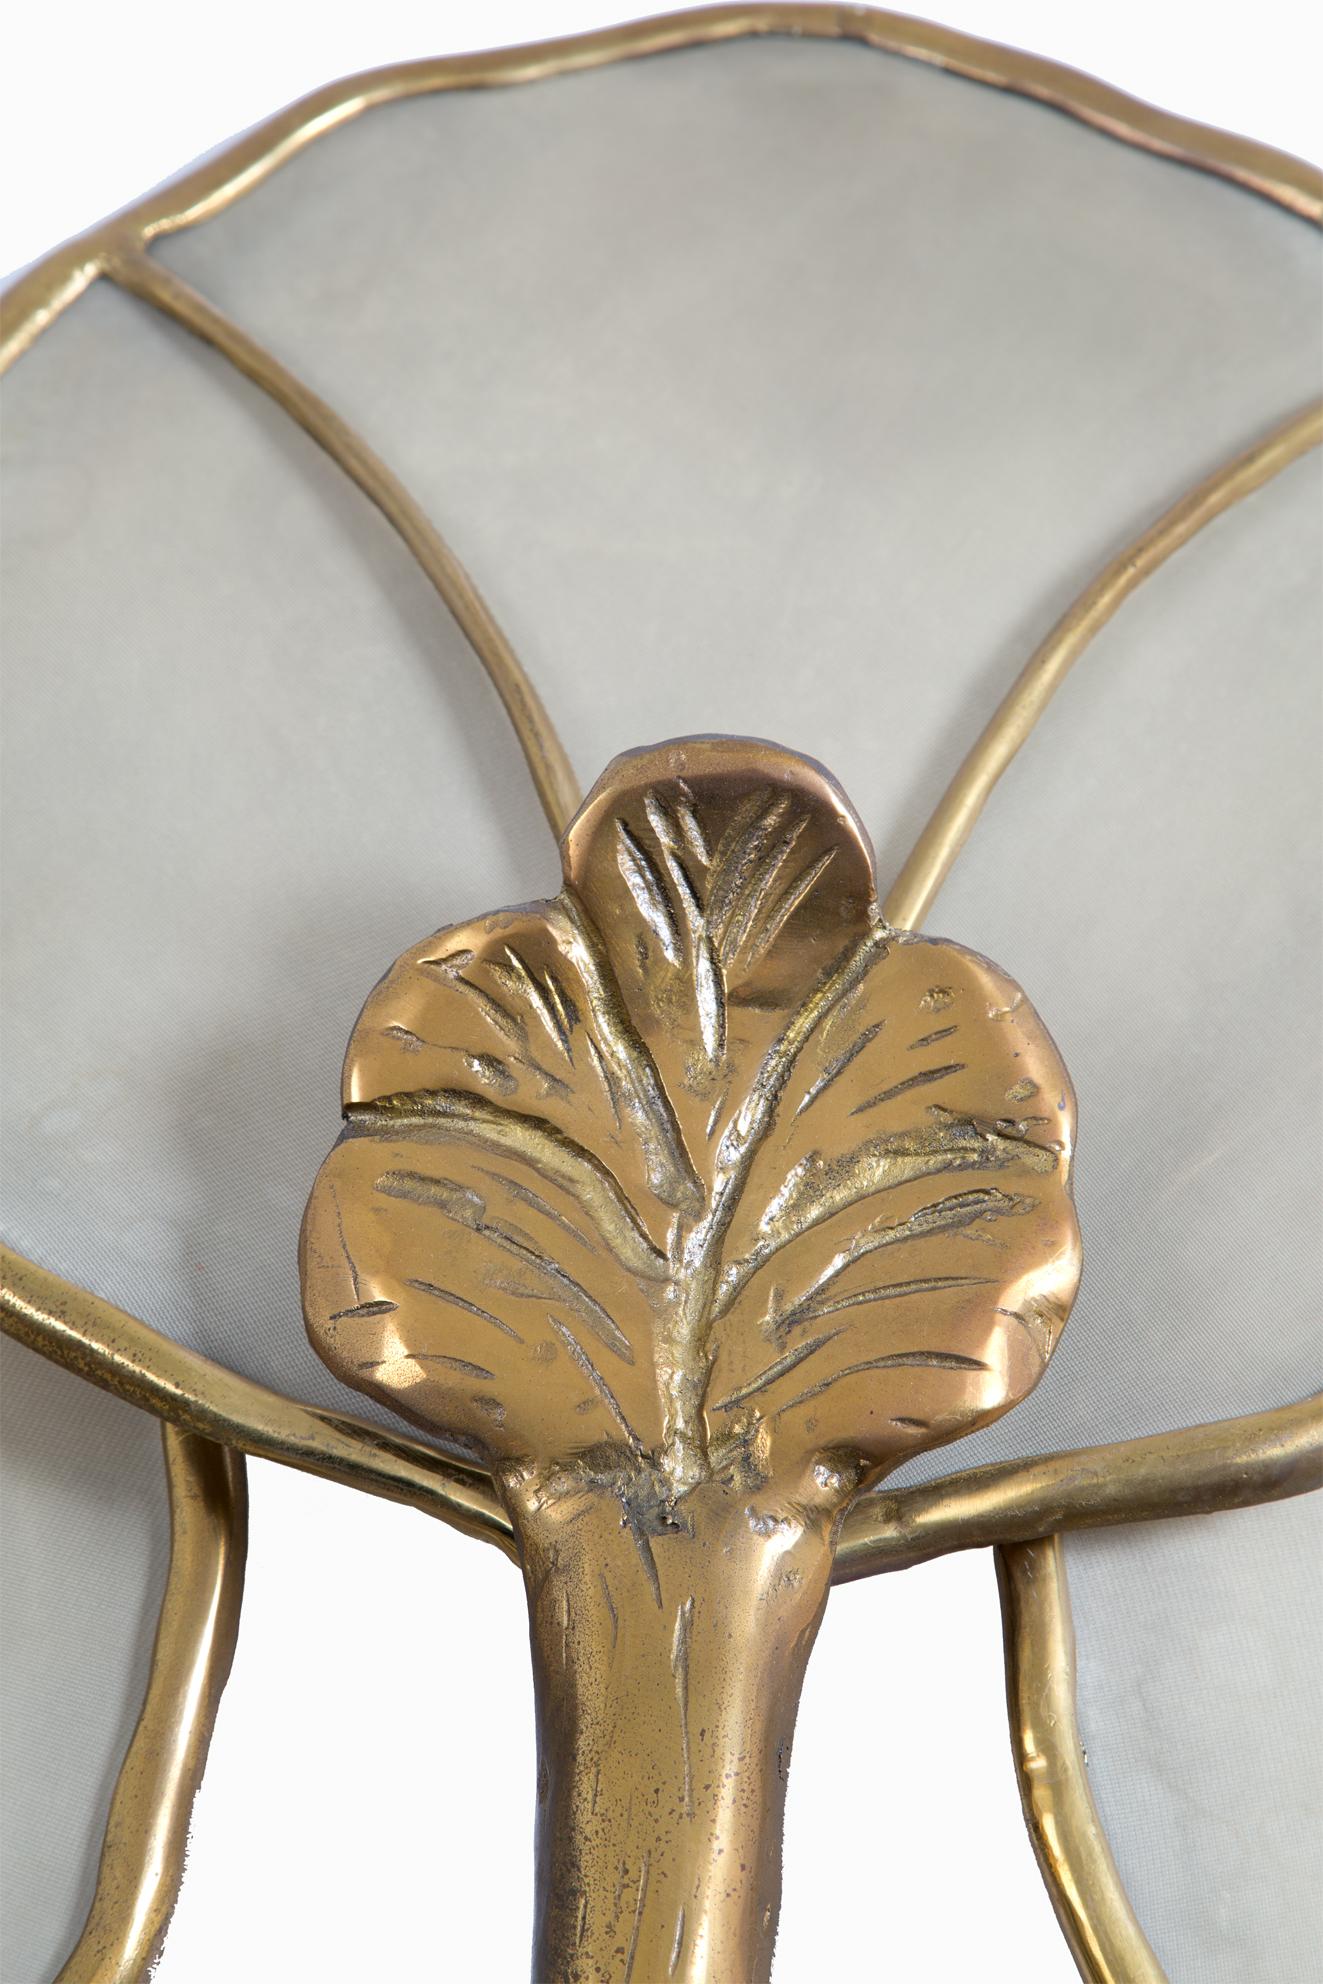 Big beautiful and original wall lamp of 20th century Italian manufacture. The wall lamp is in excellent condition. Its petals give very beautiful plays of light. The particularity of the wall lamp is its flower-shaped line that radiates from the